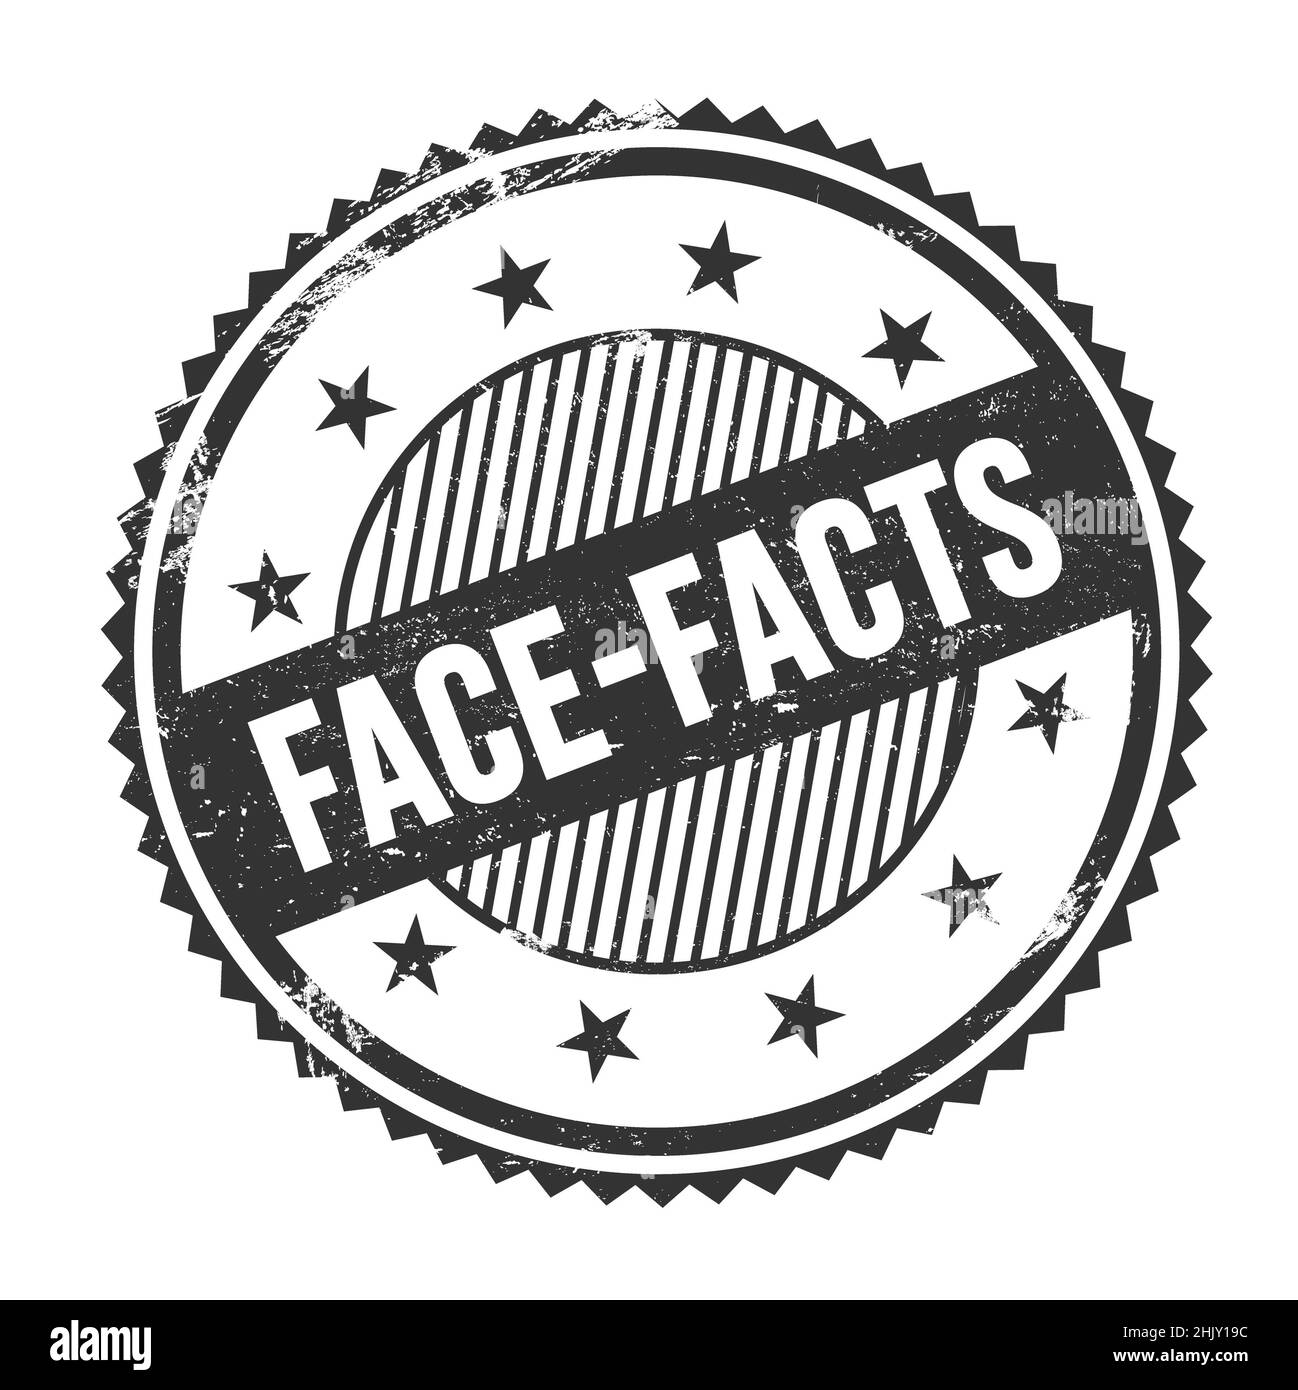 FACE-FACTS text written on black grungy zig zag borders round stamp. Stock Photo